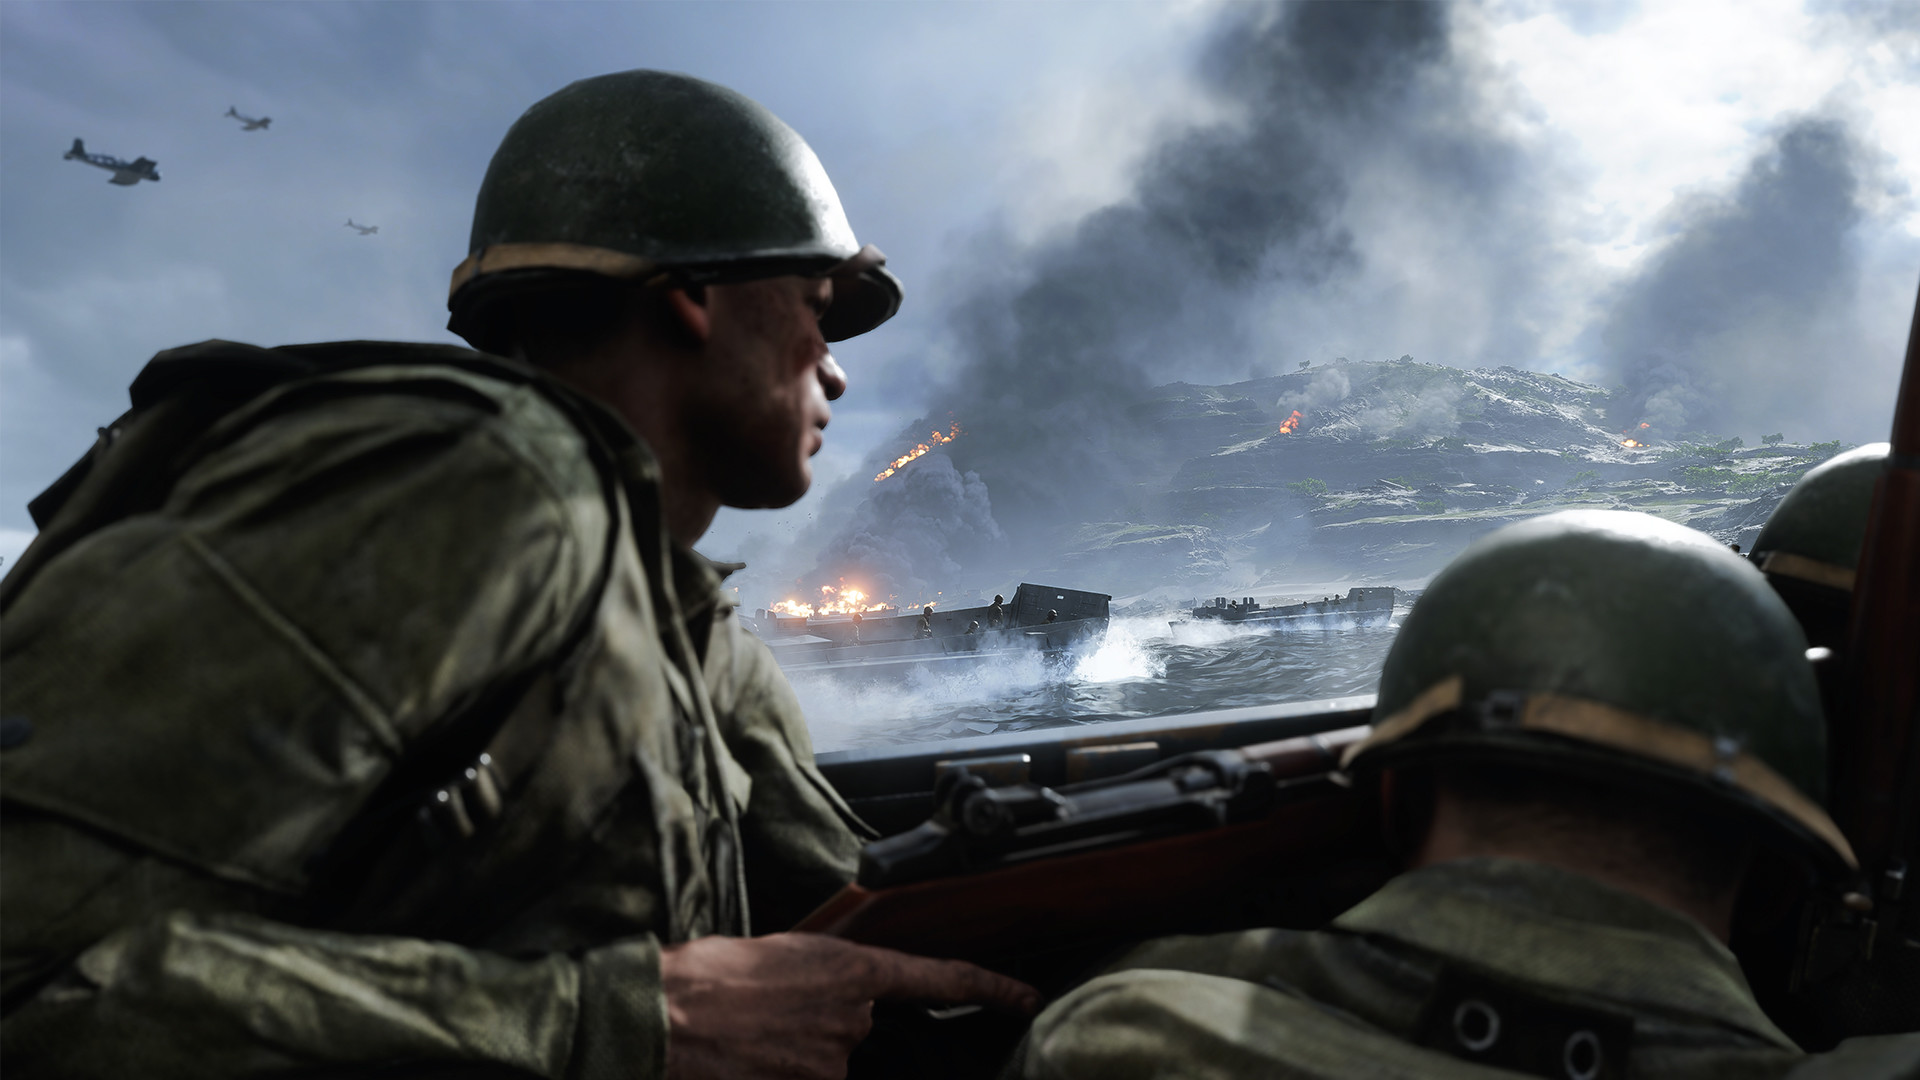 Battlefield V surges to become one of Steam’s most played titles